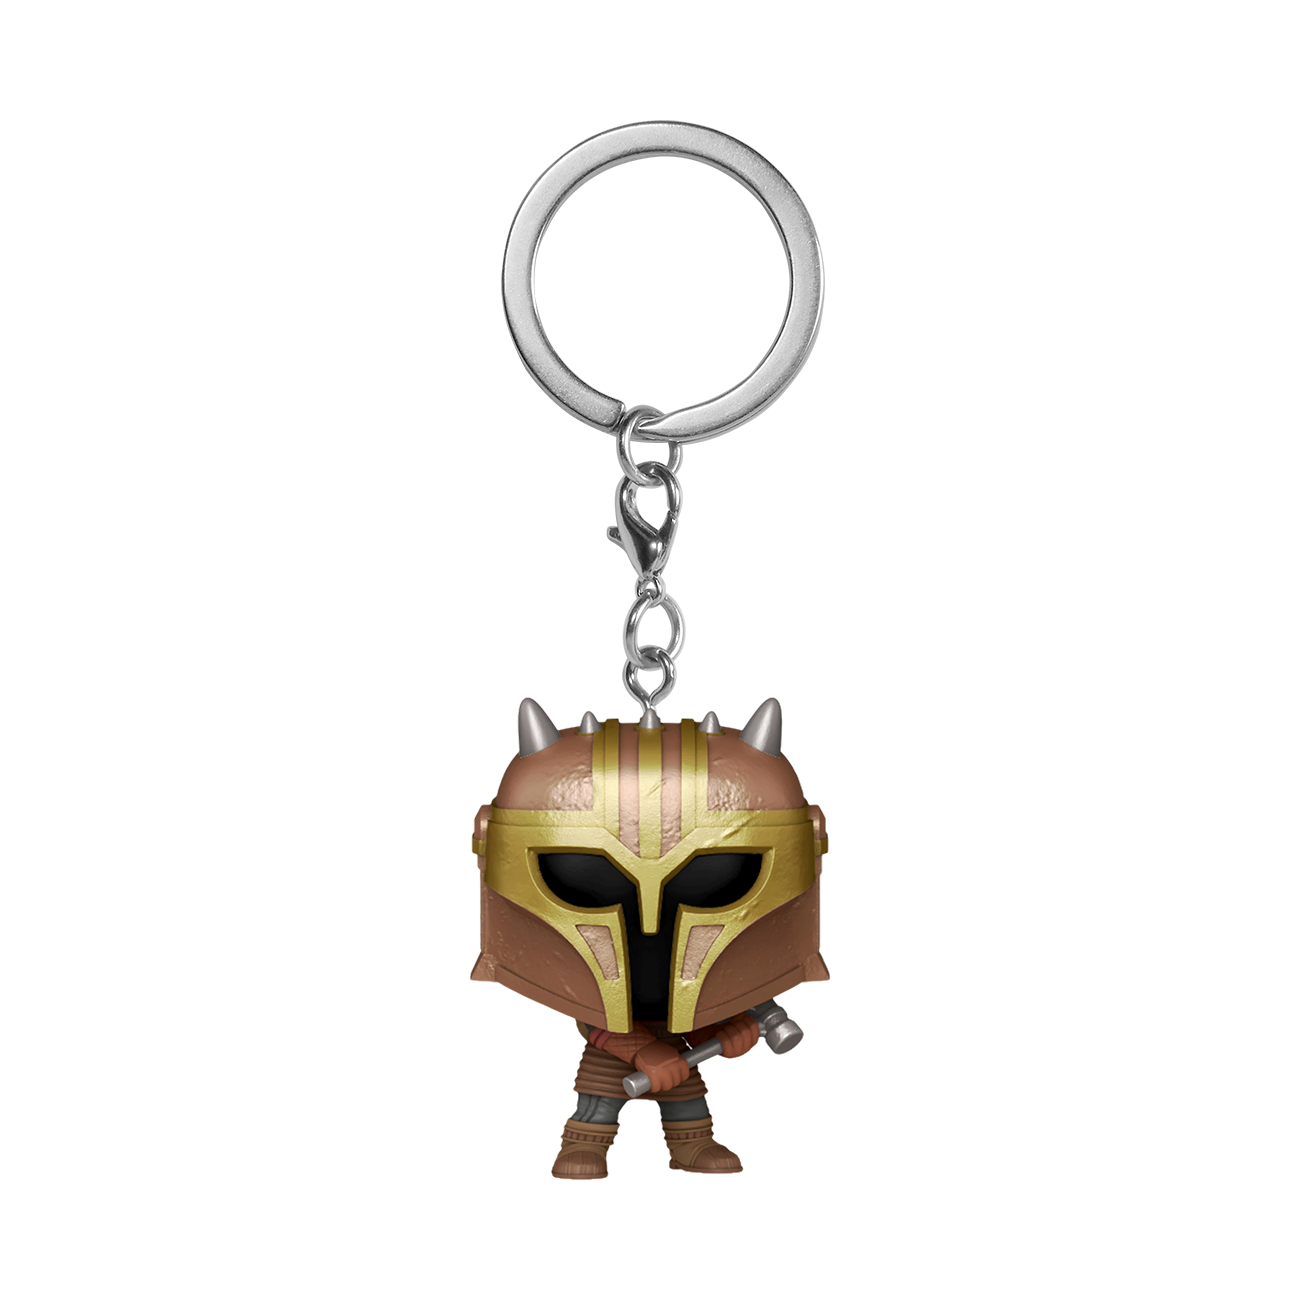 Knights of the Old Republic Returns With New Funko/GameStop Box